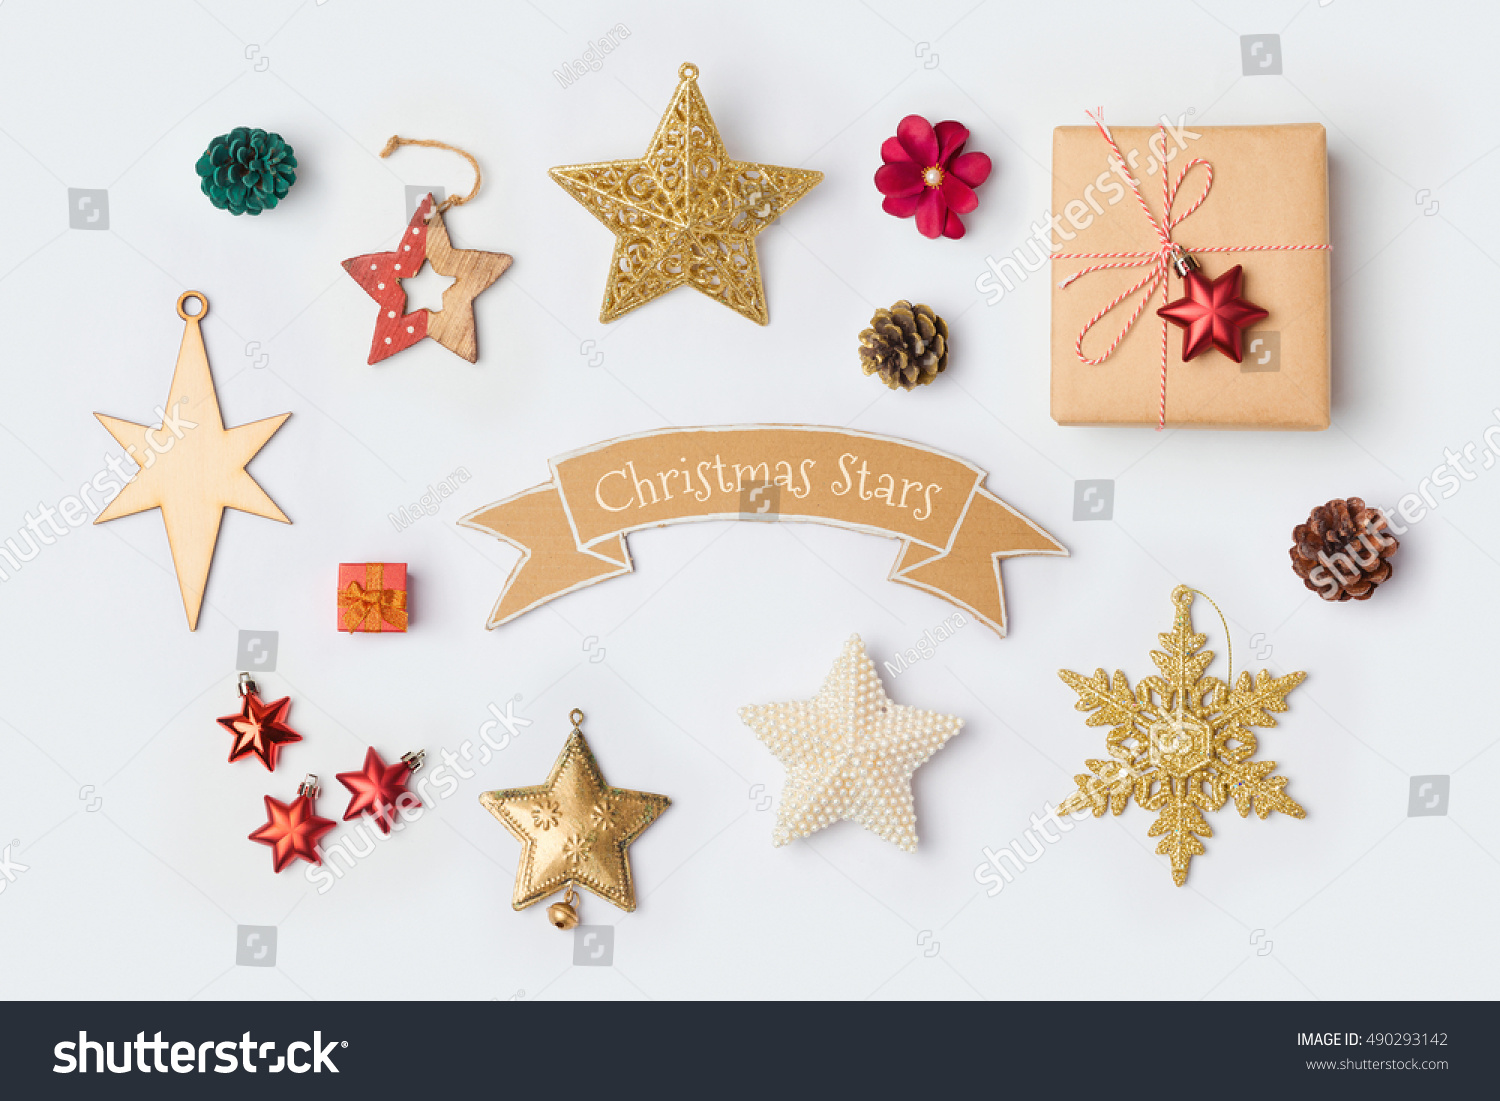 Christmas star decorations collection for mock up template design. View from above. Flat lay #490293142